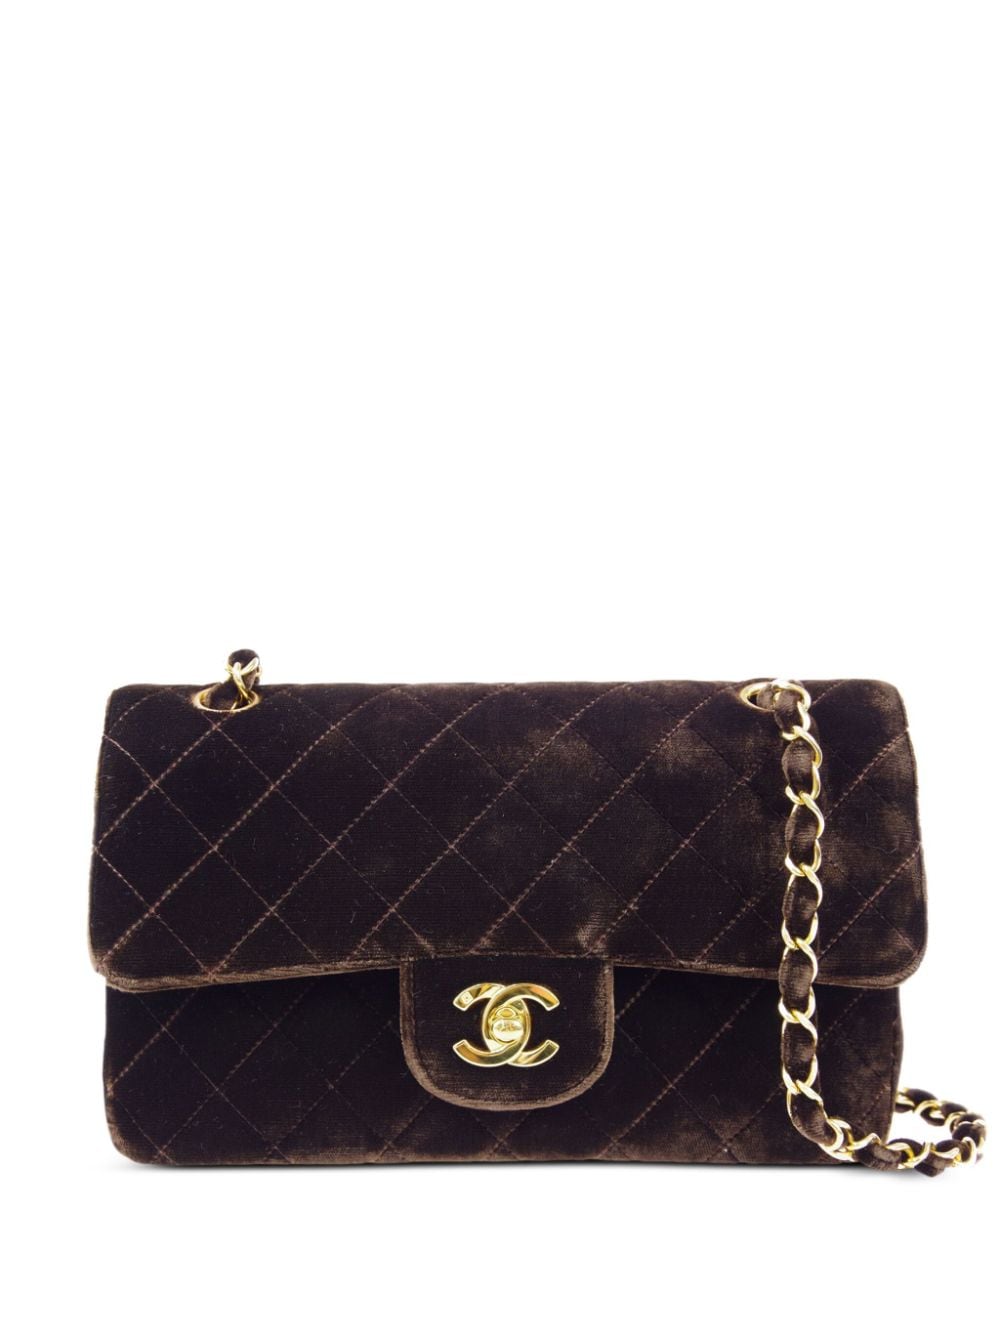 CHANEL Pre-Owned 1995 Small Double Flap Shoulder Bag - Farfetch